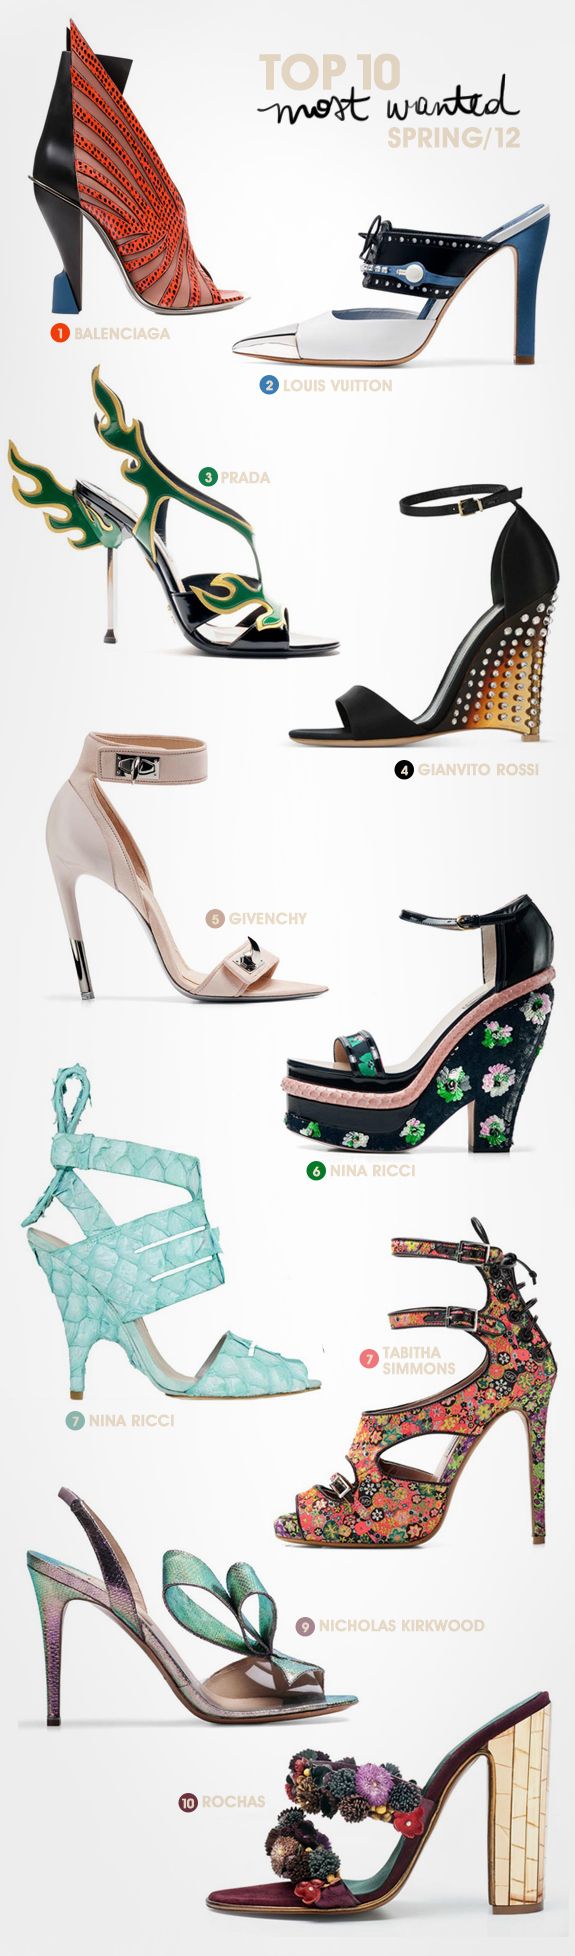 Top 10 most wanted – shoes edition